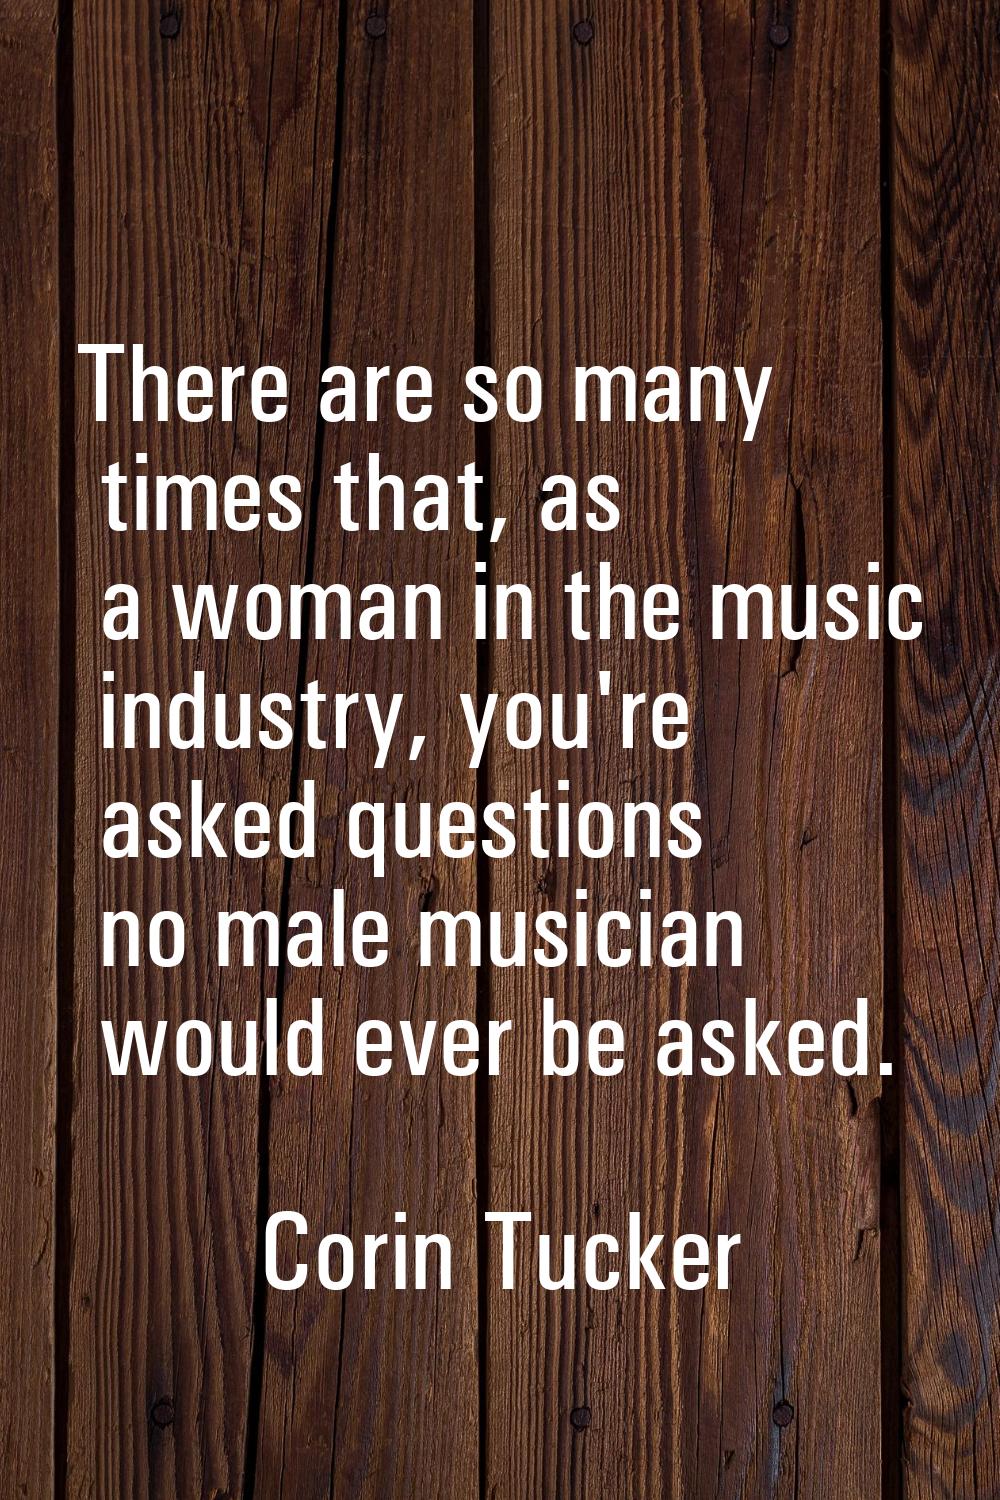 There are so many times that, as a woman in the music industry, you're asked questions no male musi